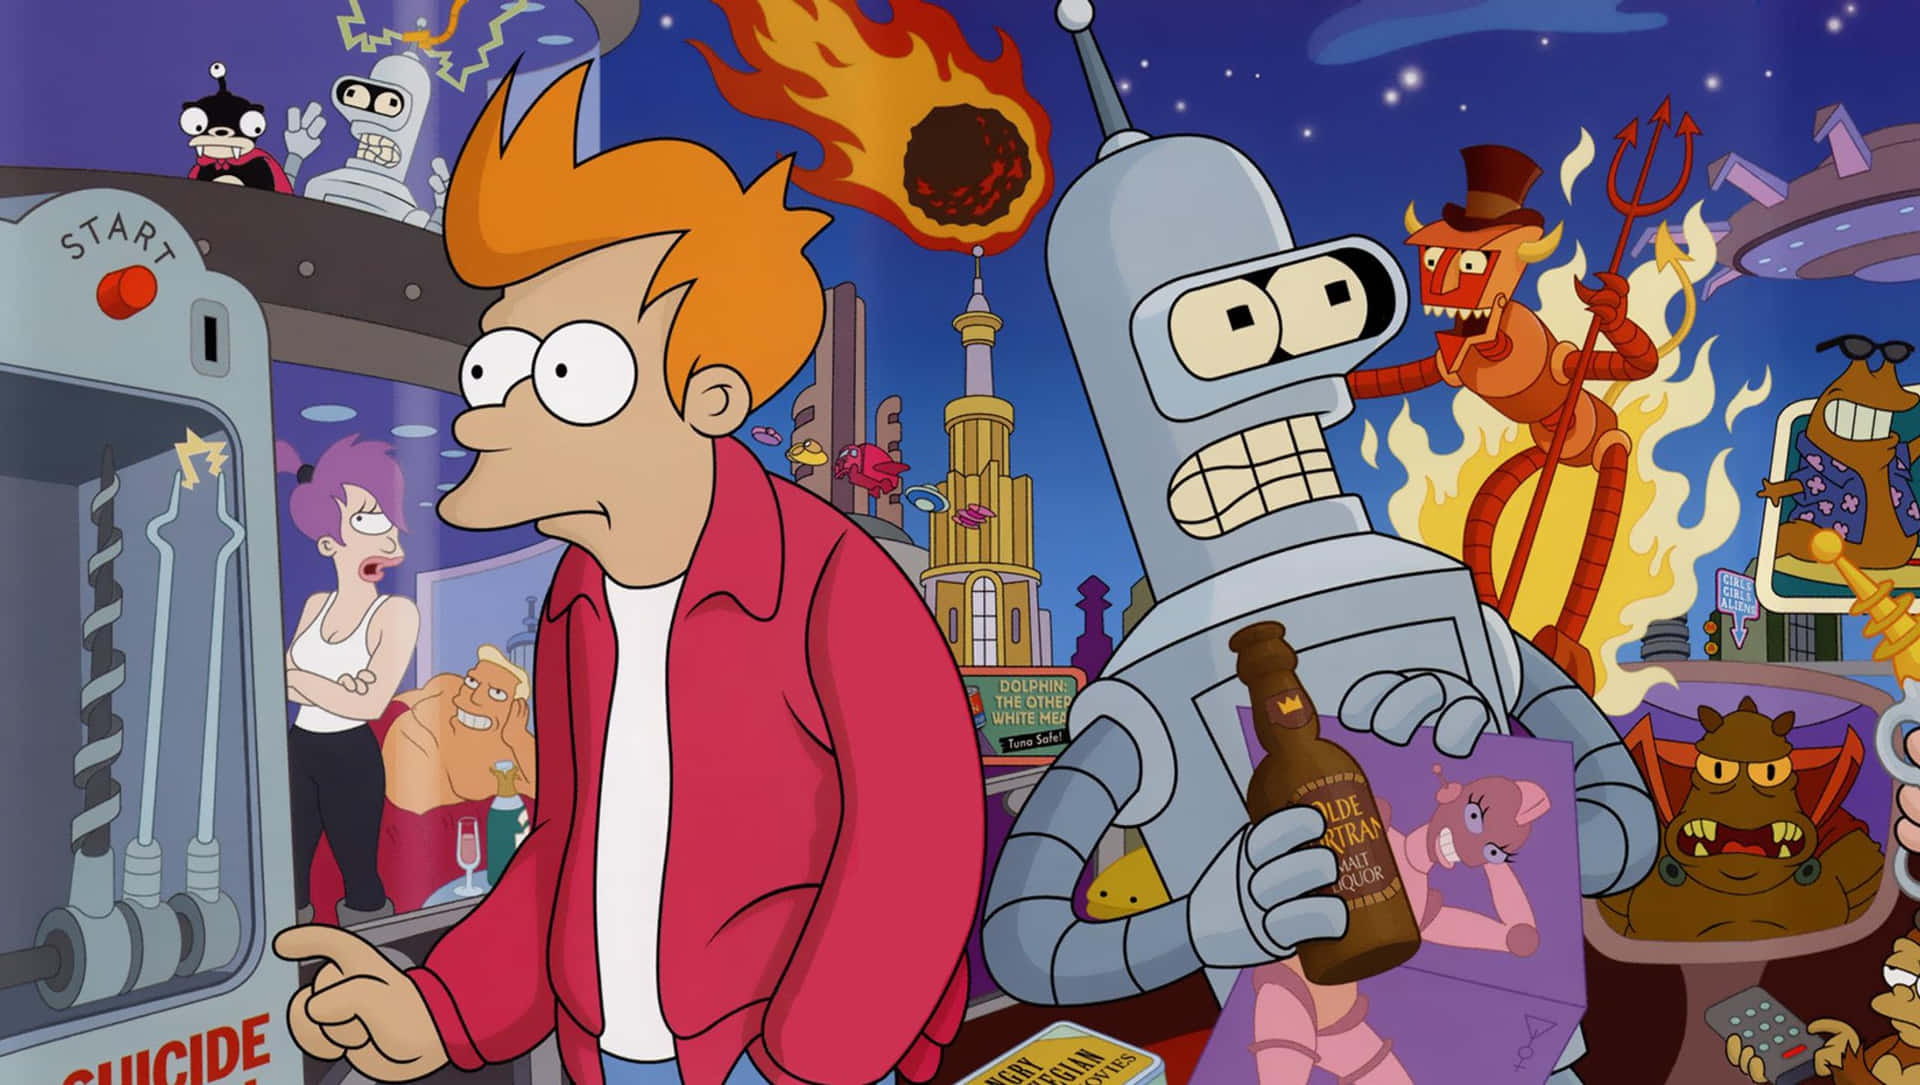 The Futurama crew posing together in New New York City.